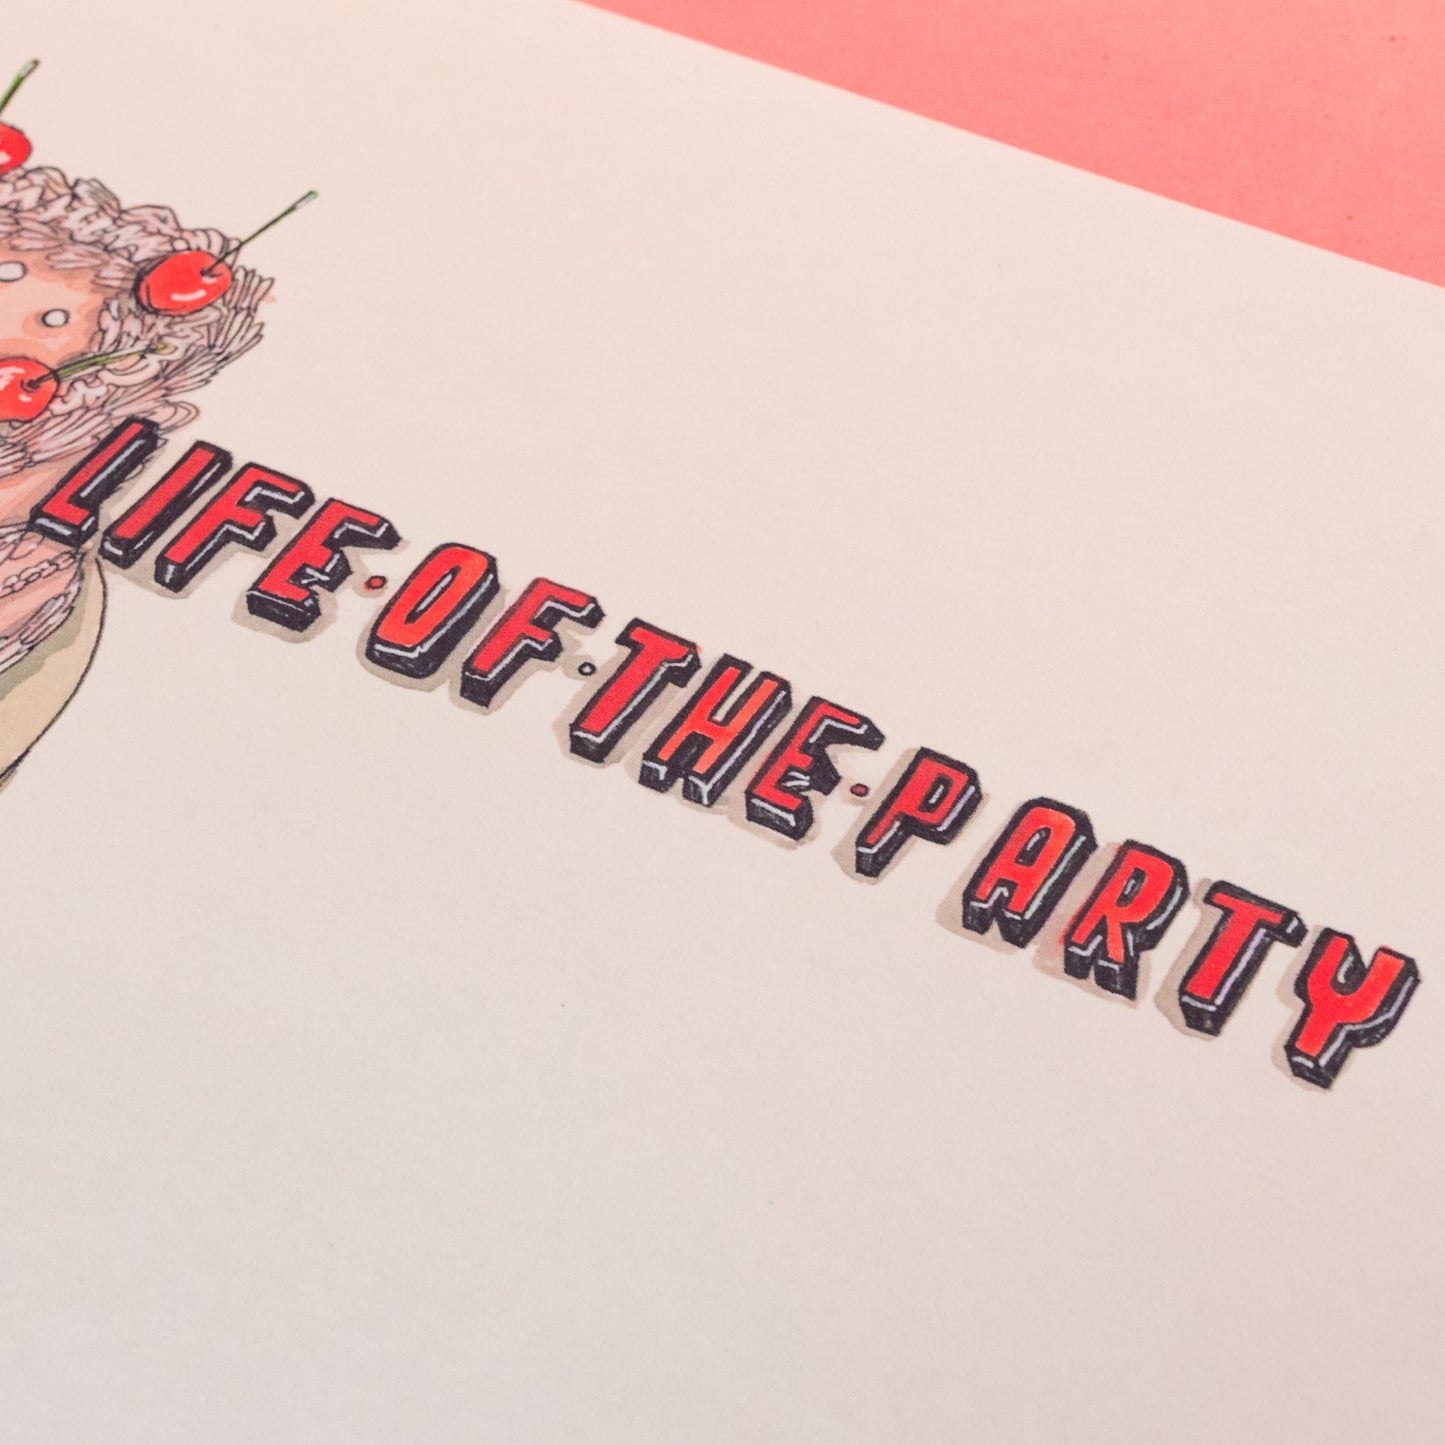 life of the party in red lettering